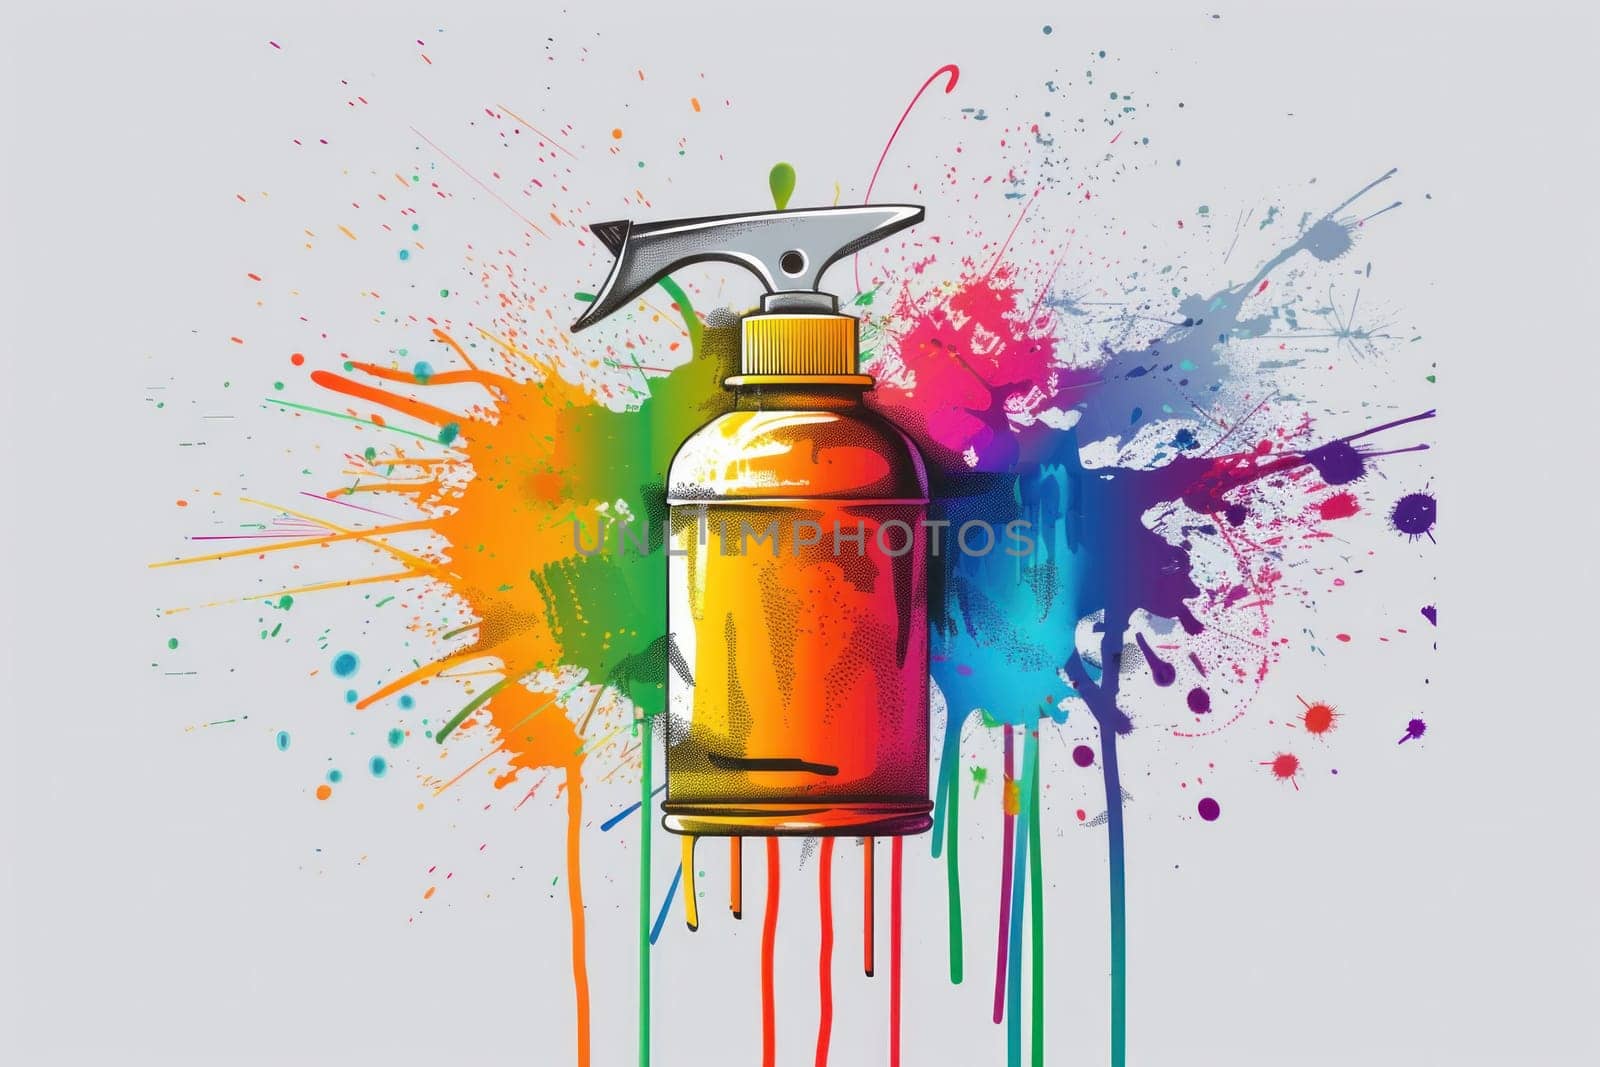 Artistic spray bottle with paint splatters and spray can on grey background, creative tools for art projects and diy crafts